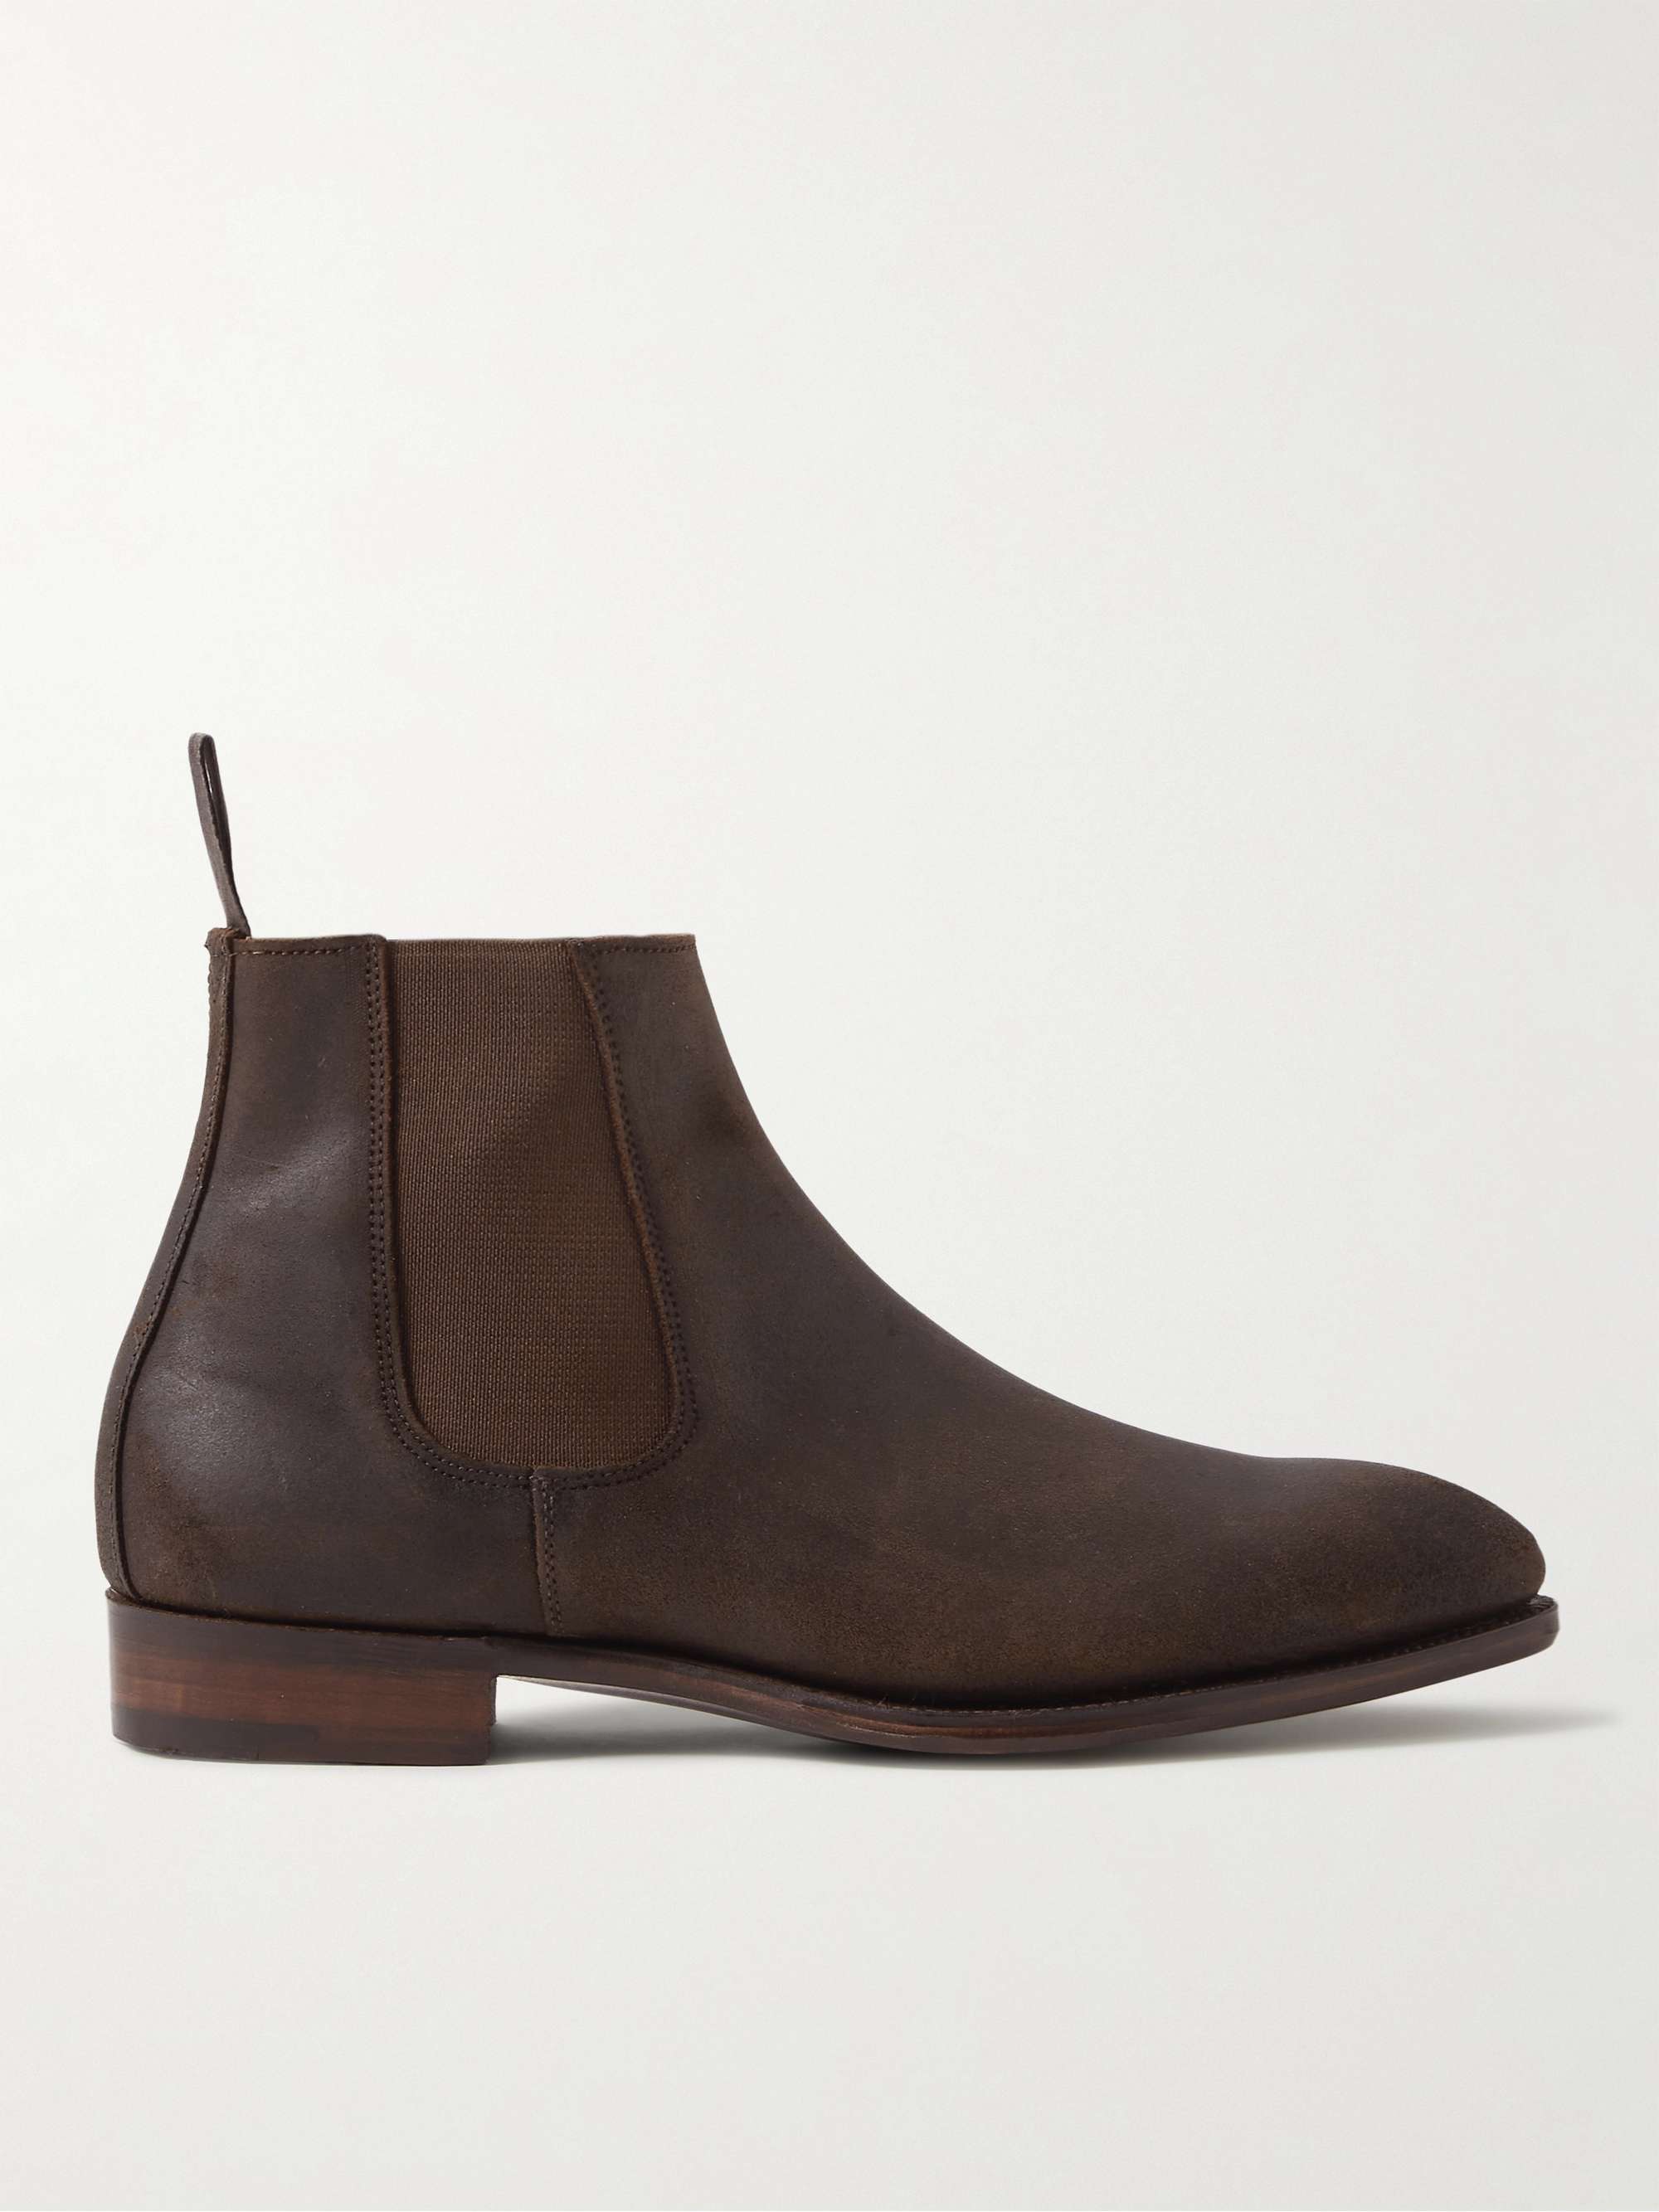 GEORGE CLEVERLEY Jason Roughout Suede Chelsea Boots